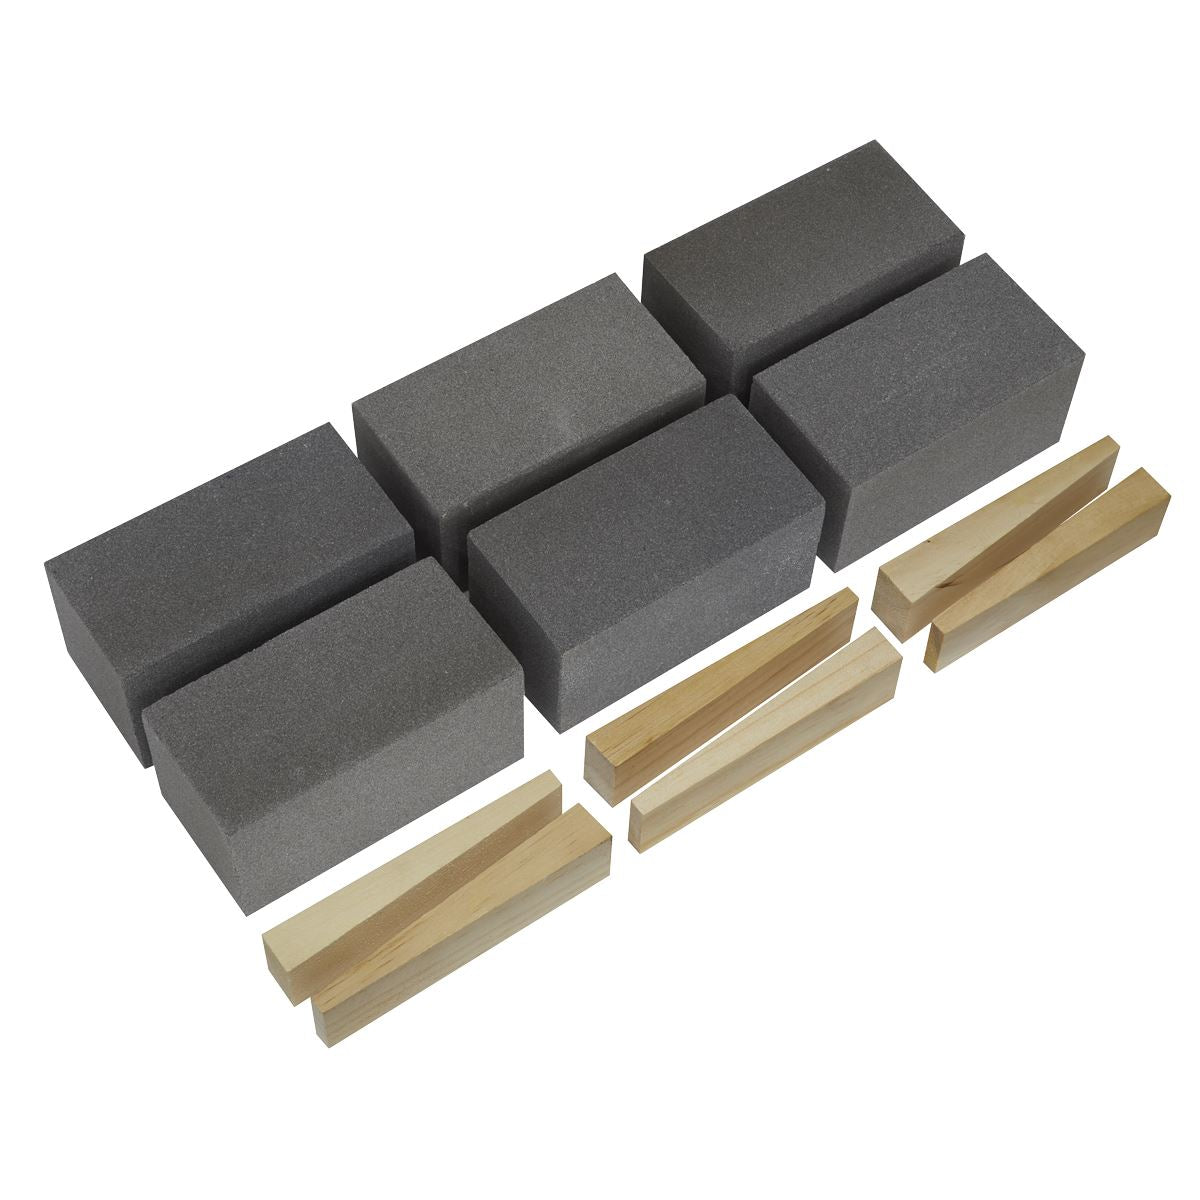 Worksafe by Sealey Floor Grinding Block 50 x 50 x 100mm 120Grit - Pack of 6